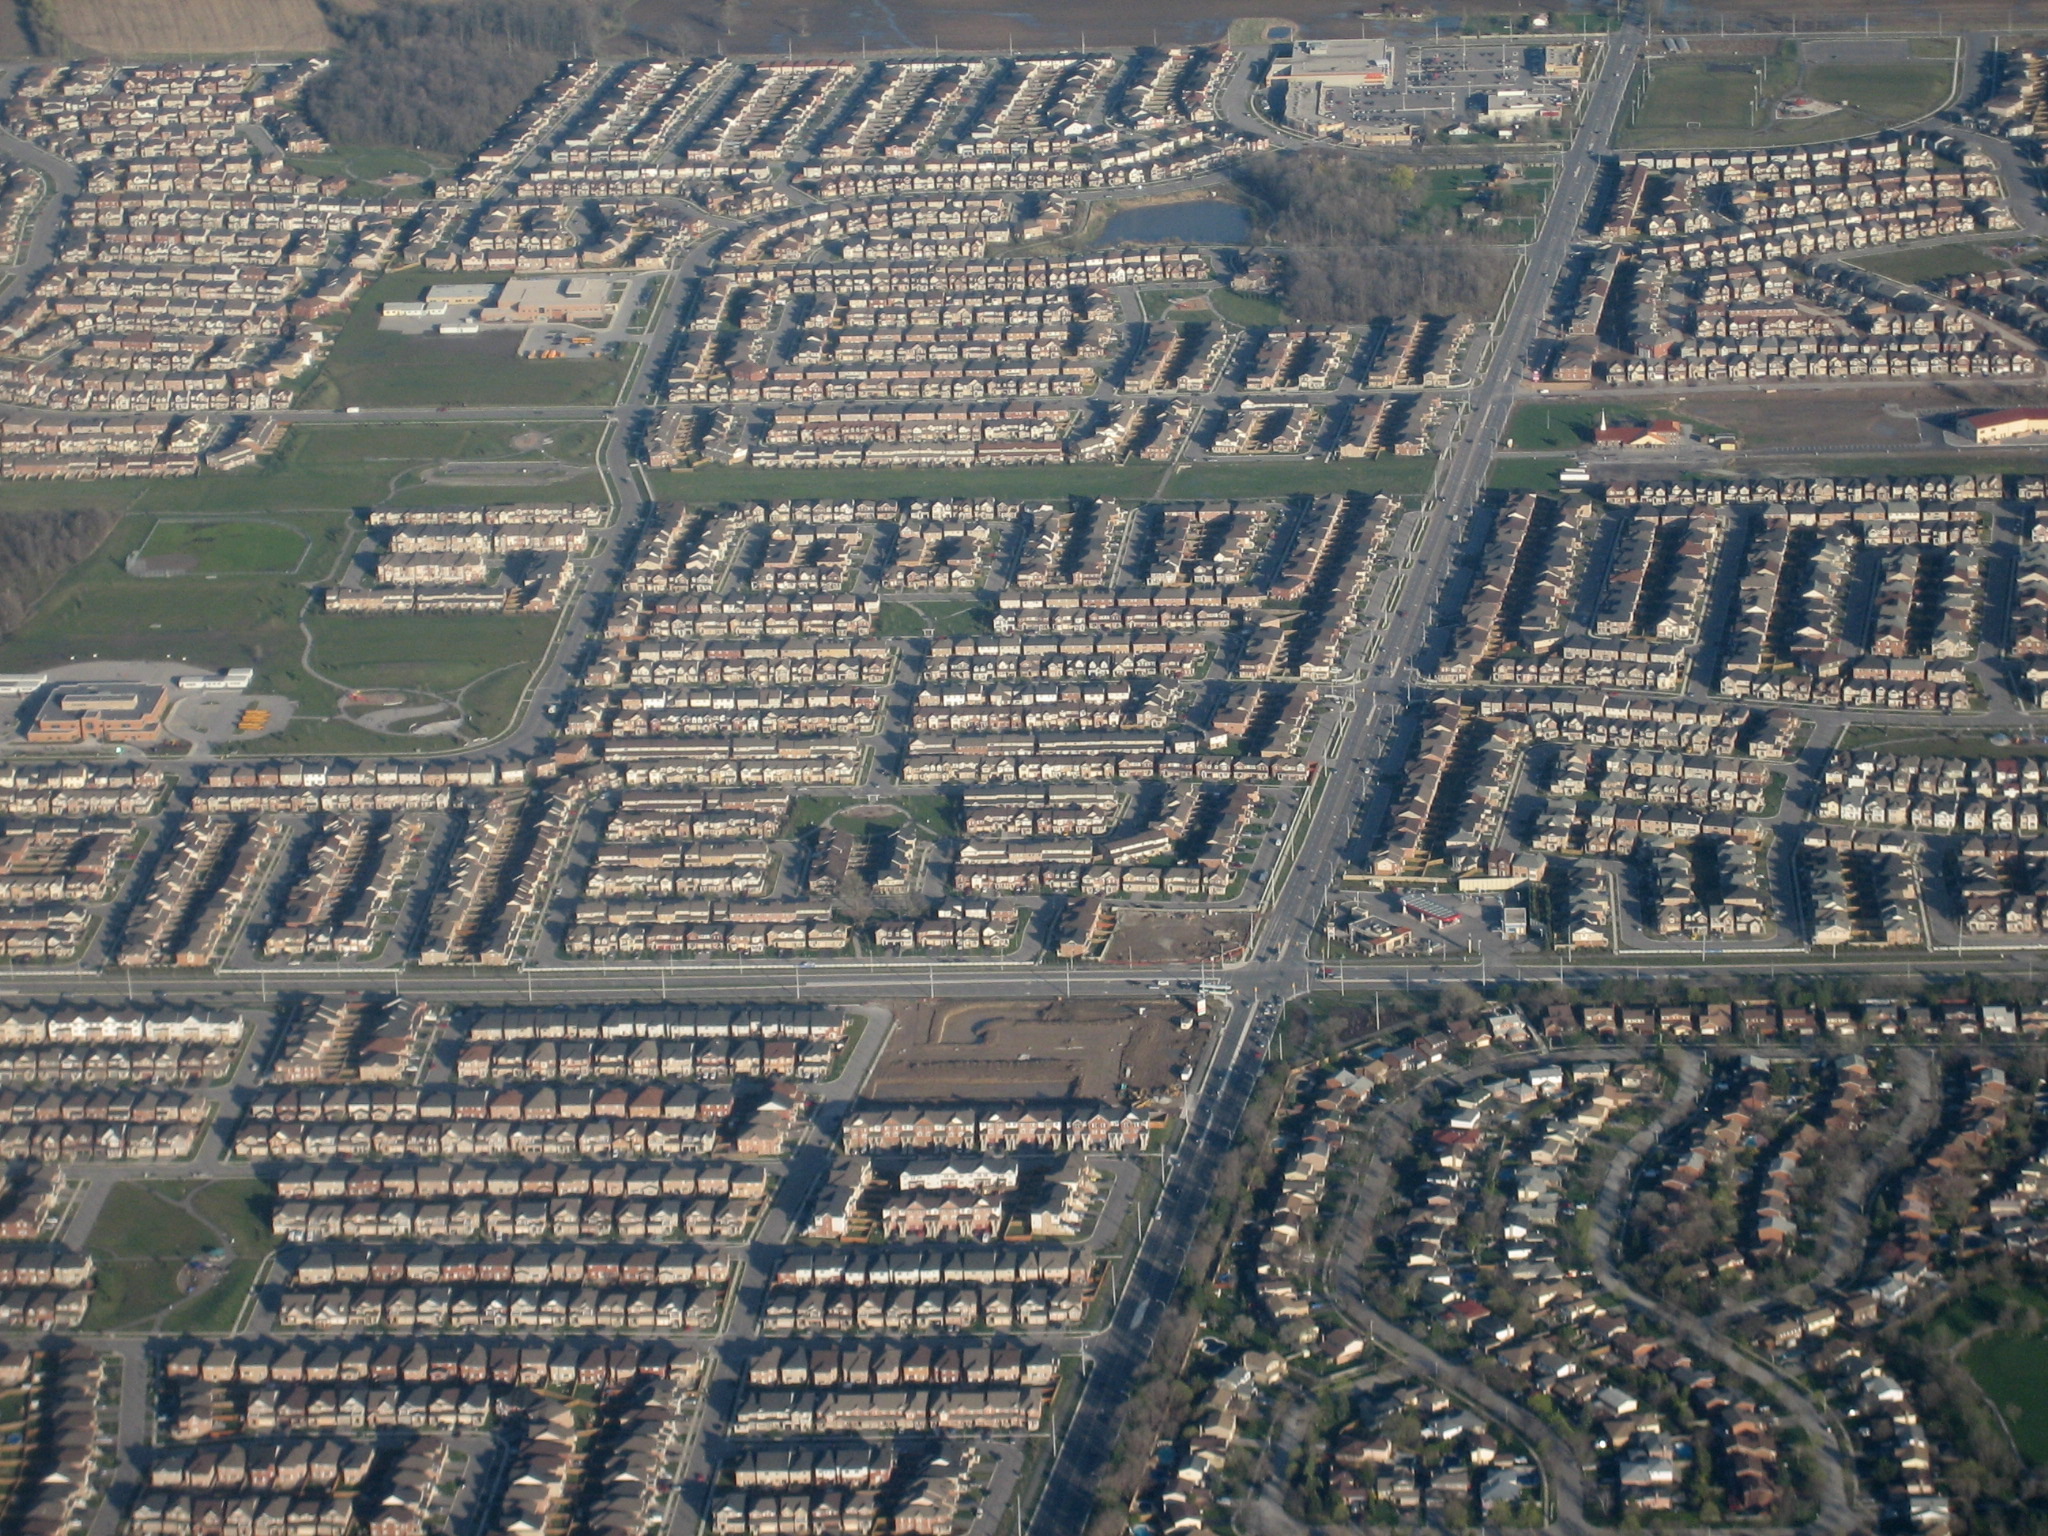 An aerial view of rows of houses in the suburbs of Milton.